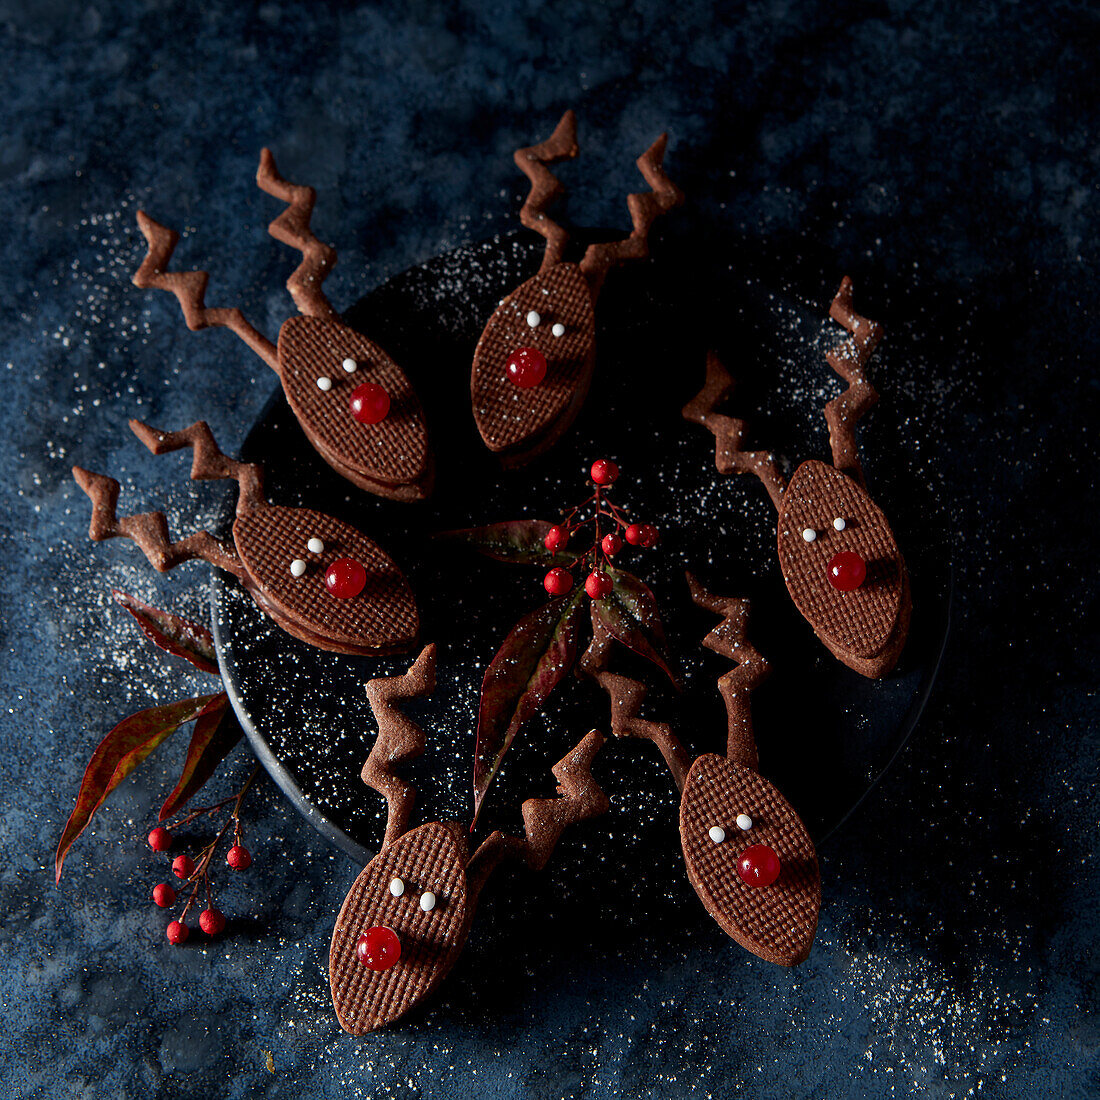 Christmas reindeer-shaped chocolate shortbread biscuits